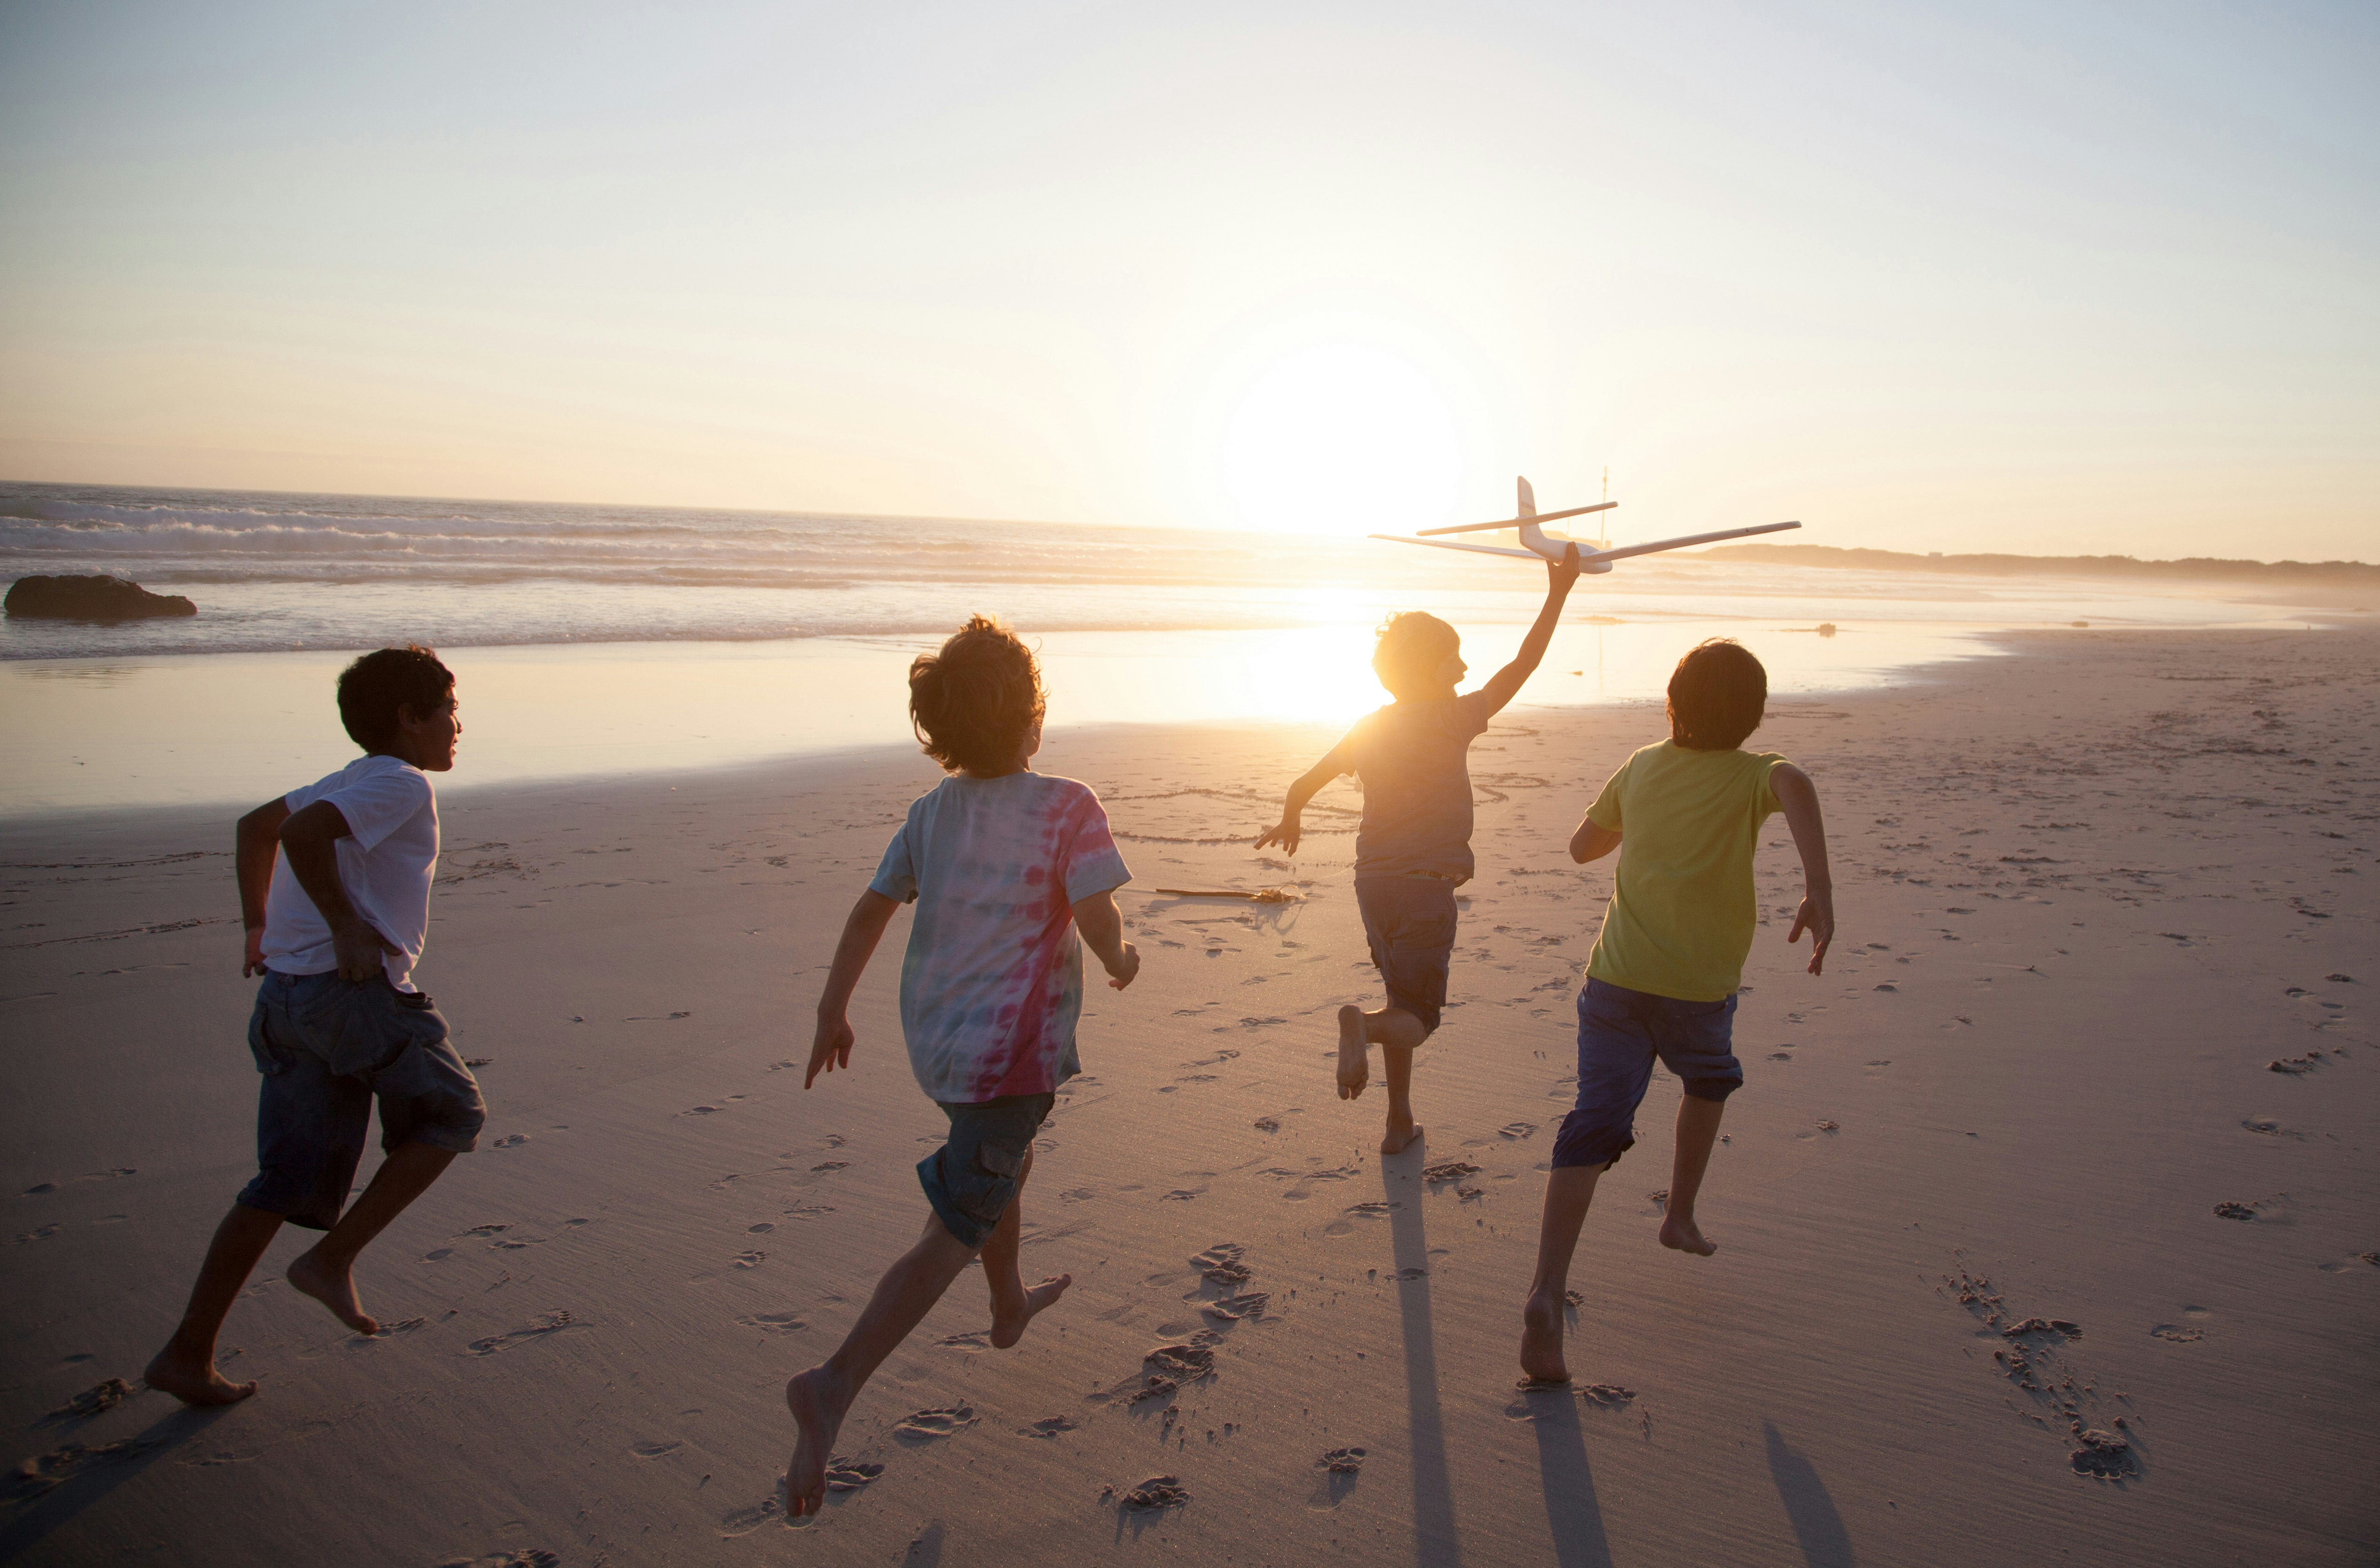 Boys running along beach with a toy plane